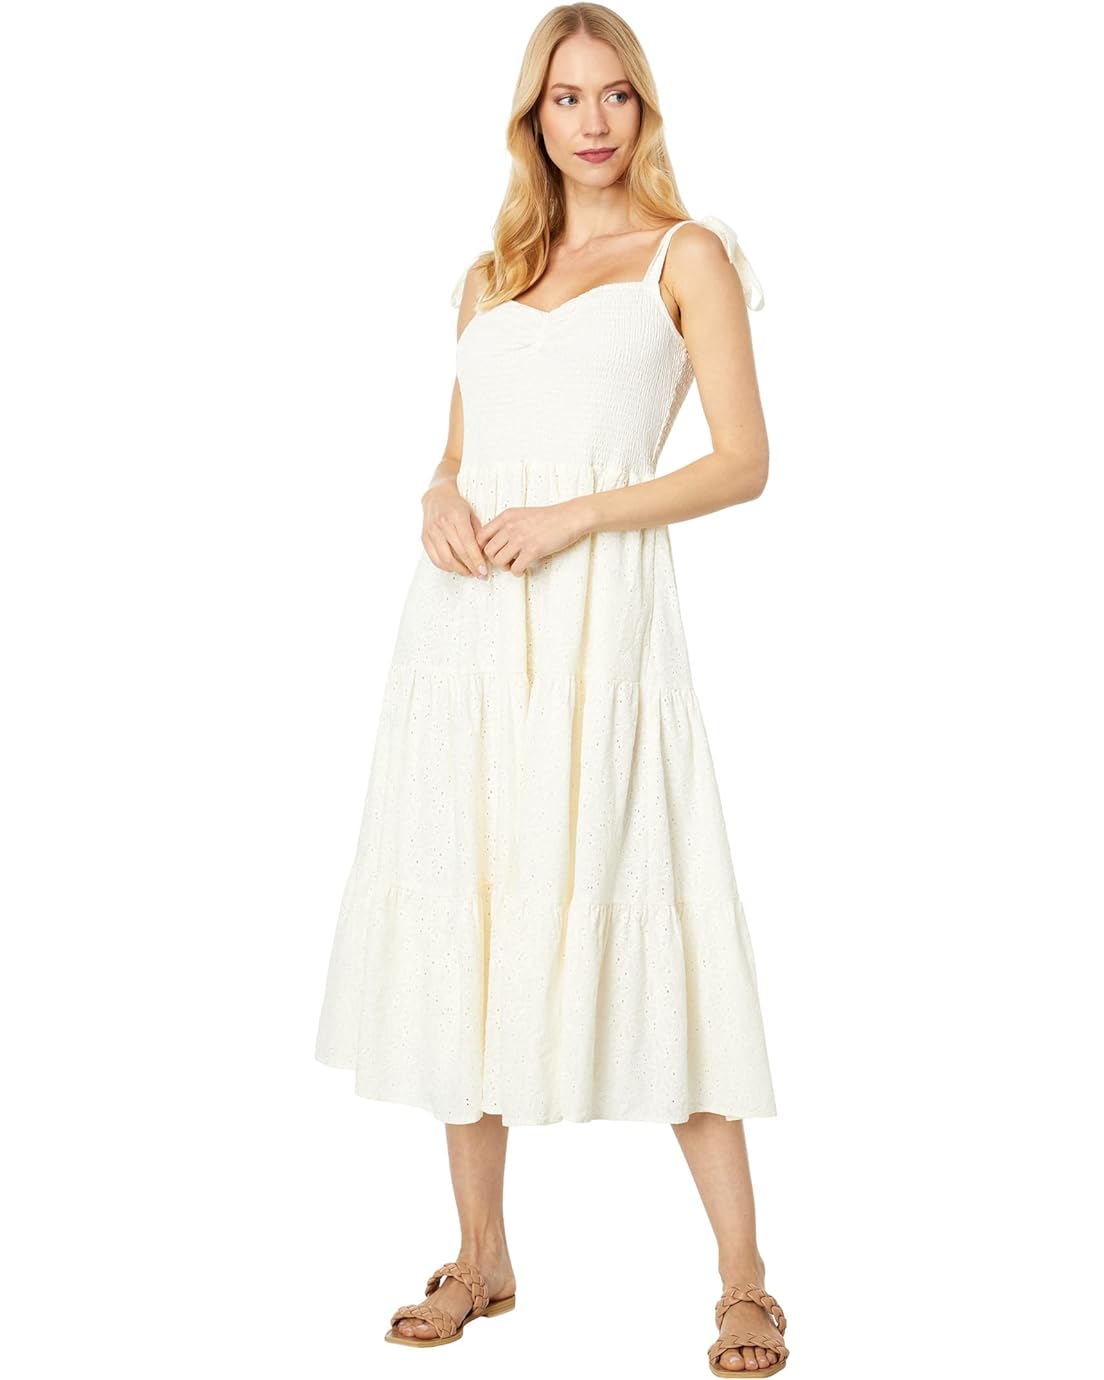 Madewell Eyelet Lucie Tie-Strap Tiered Midi Dress